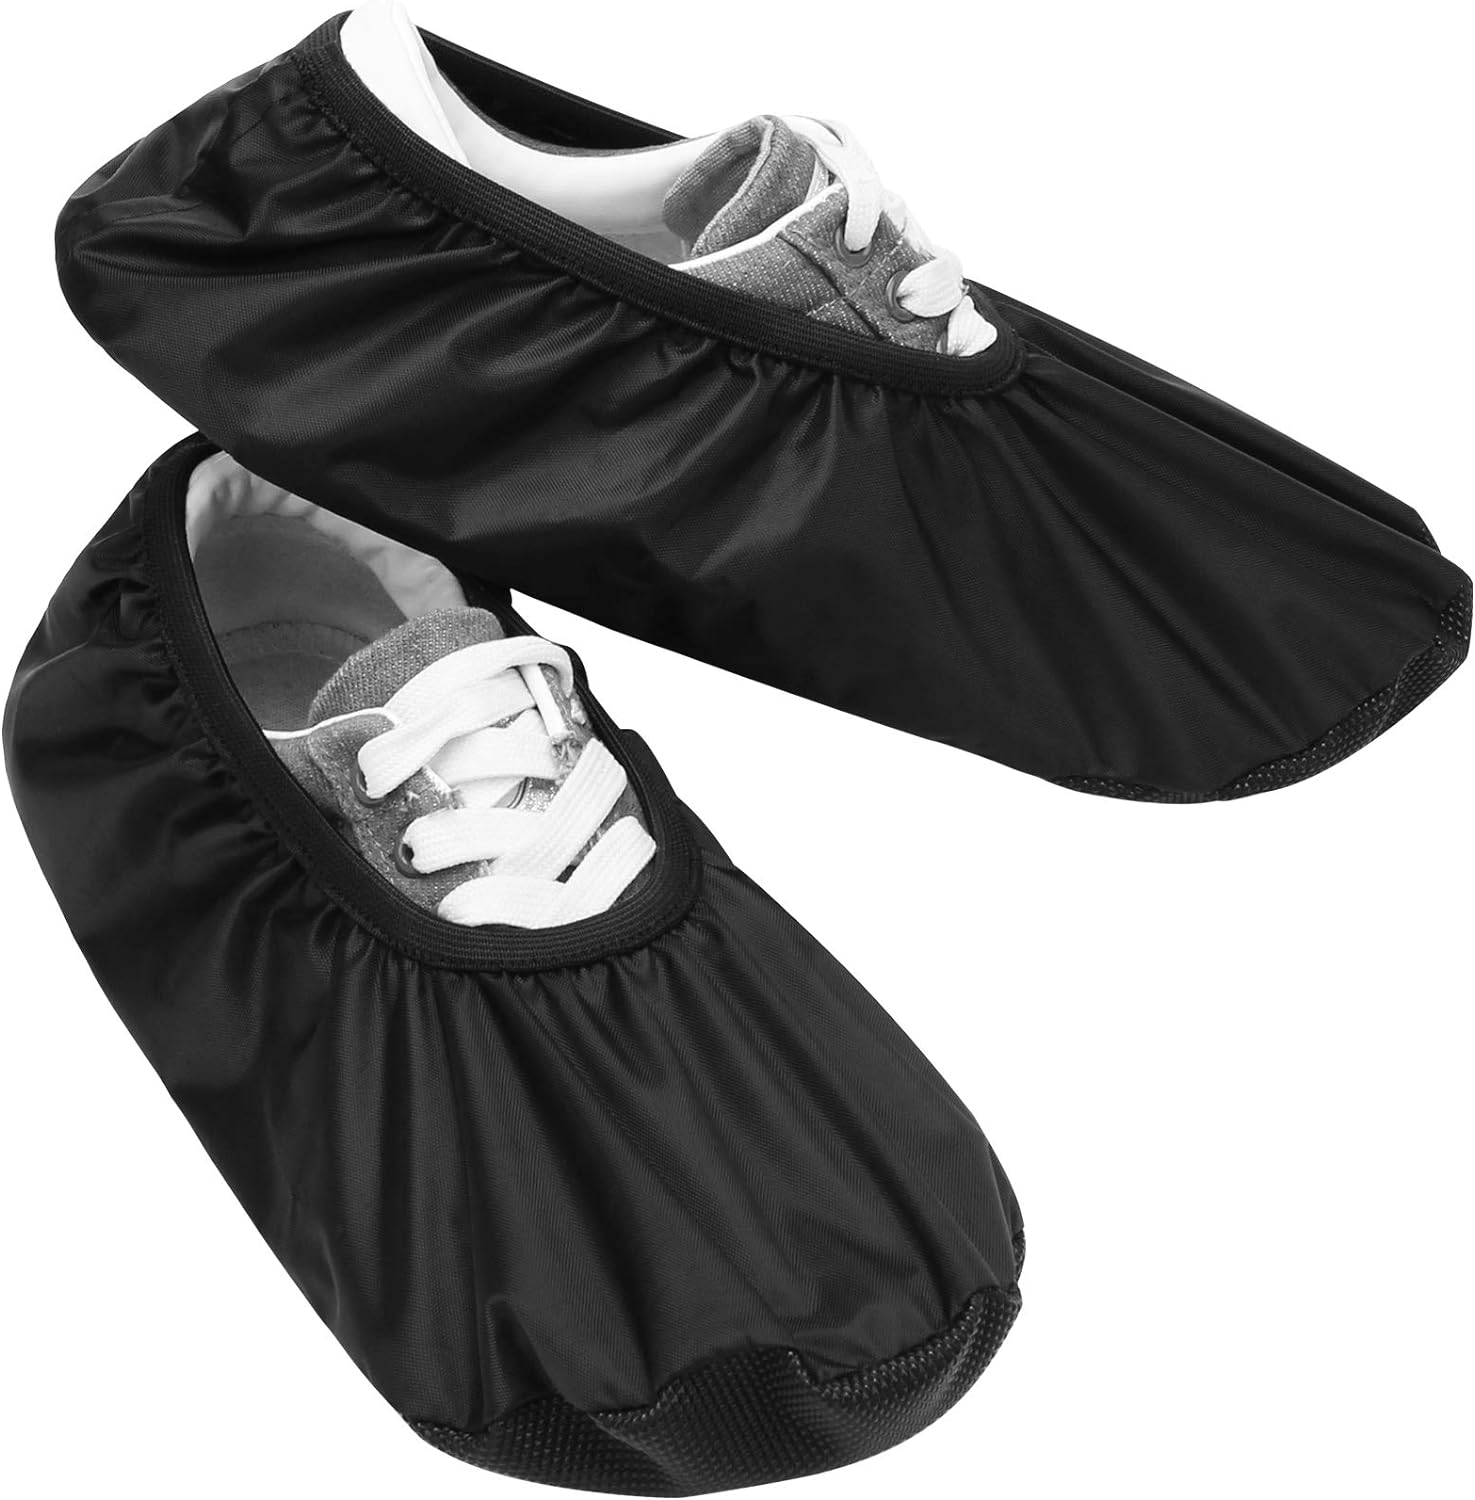 COITEK Bowling Shoe Covers, Shoe Protector Covers for Bowling Shoe Waterproof Reusable and Anti Slip